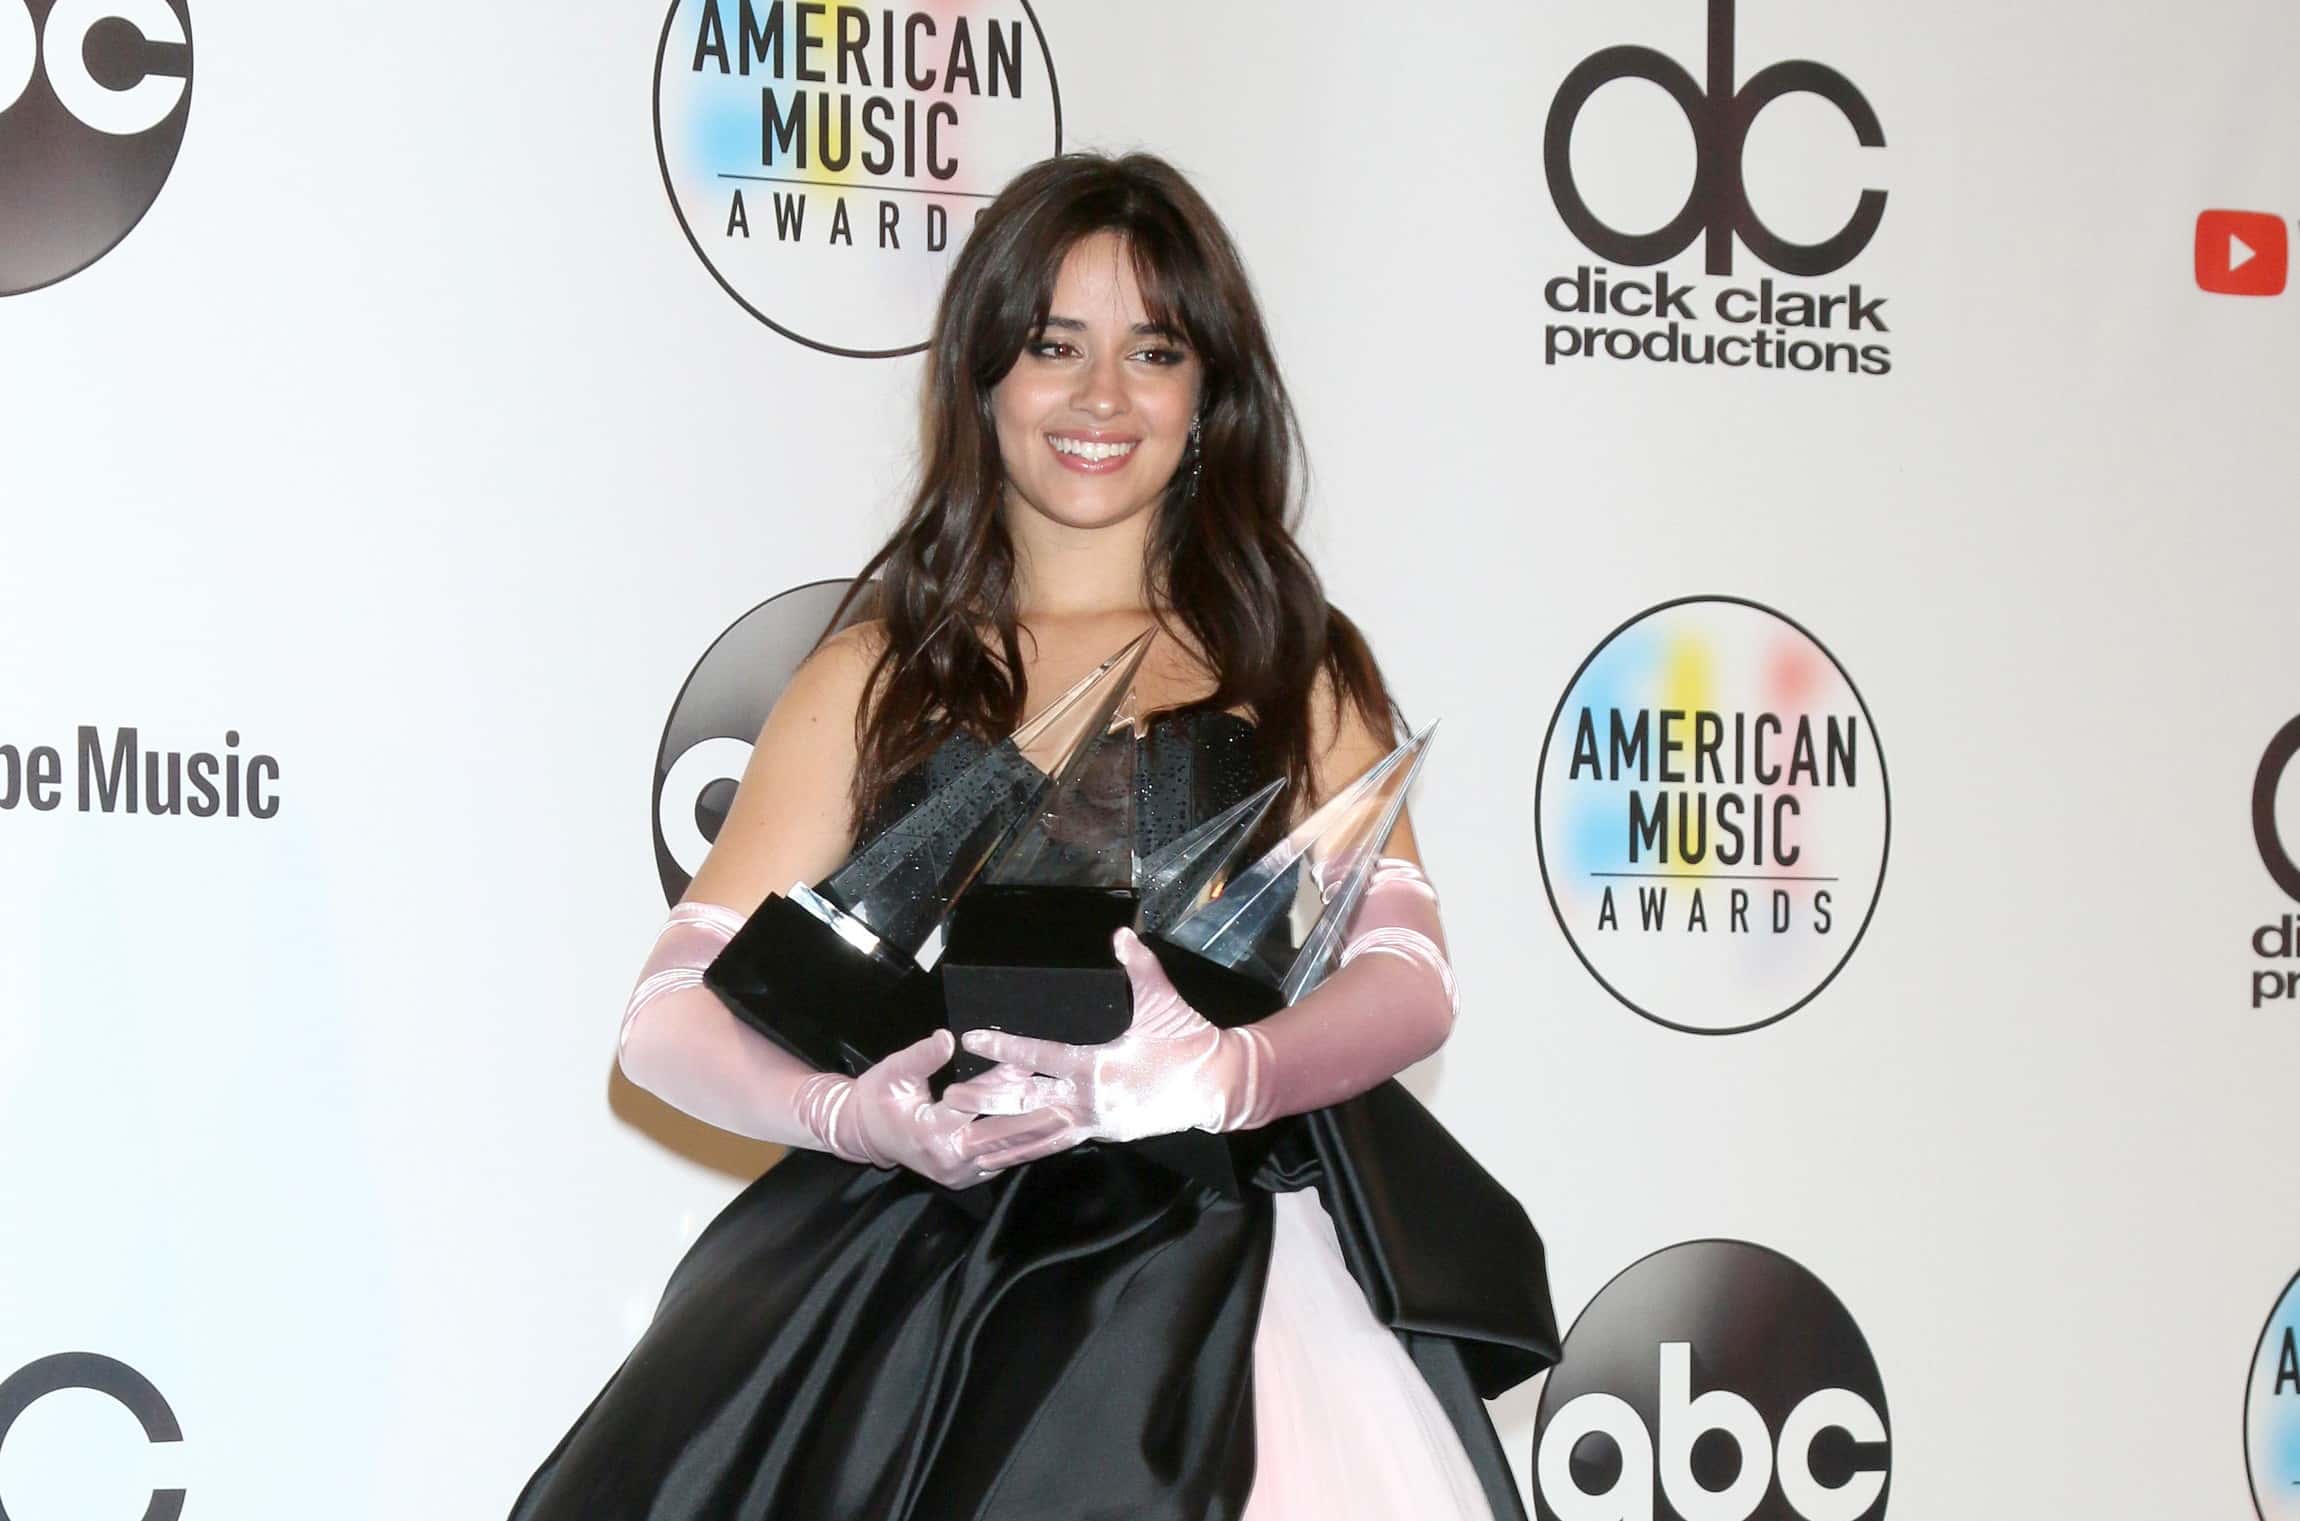 21 geeky facts about Camila Cabello